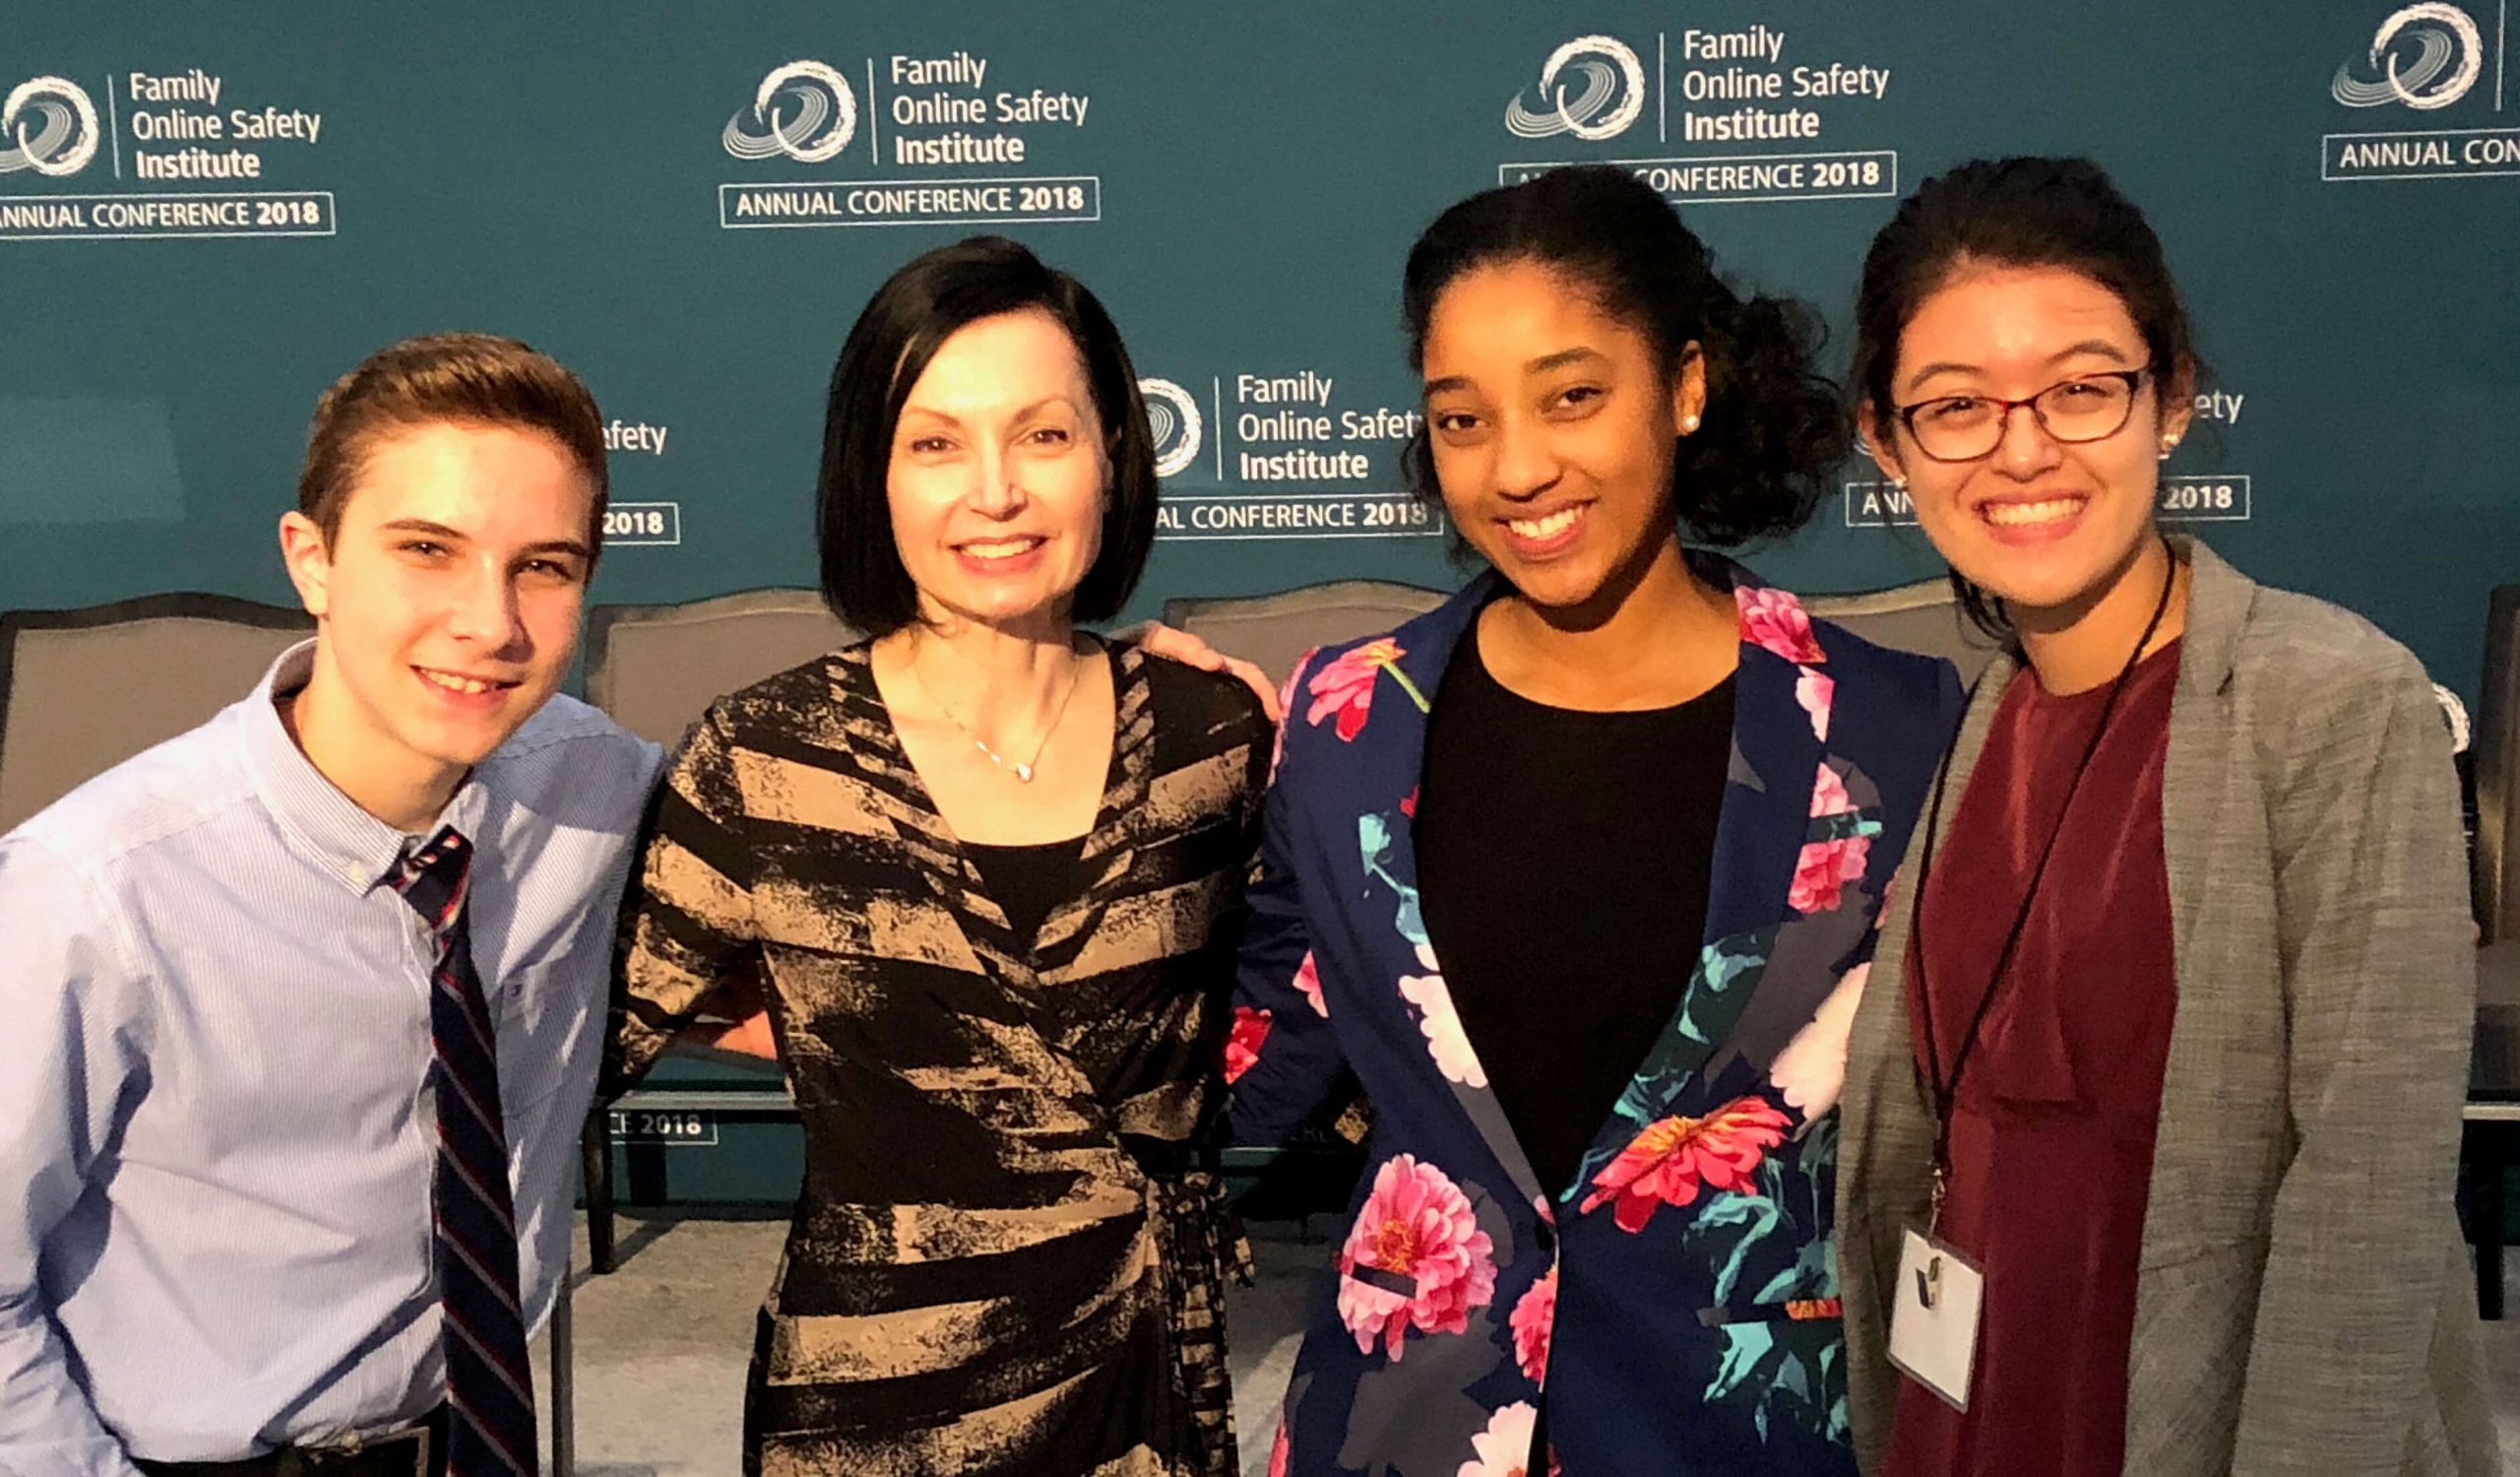 Jacqueline Beauchere, second from left, with, from left, Judah, Bronte and Christina, three members of Microsoft’s inaugural Council for Digital Good at the Family Online Safety Institute annual conference.